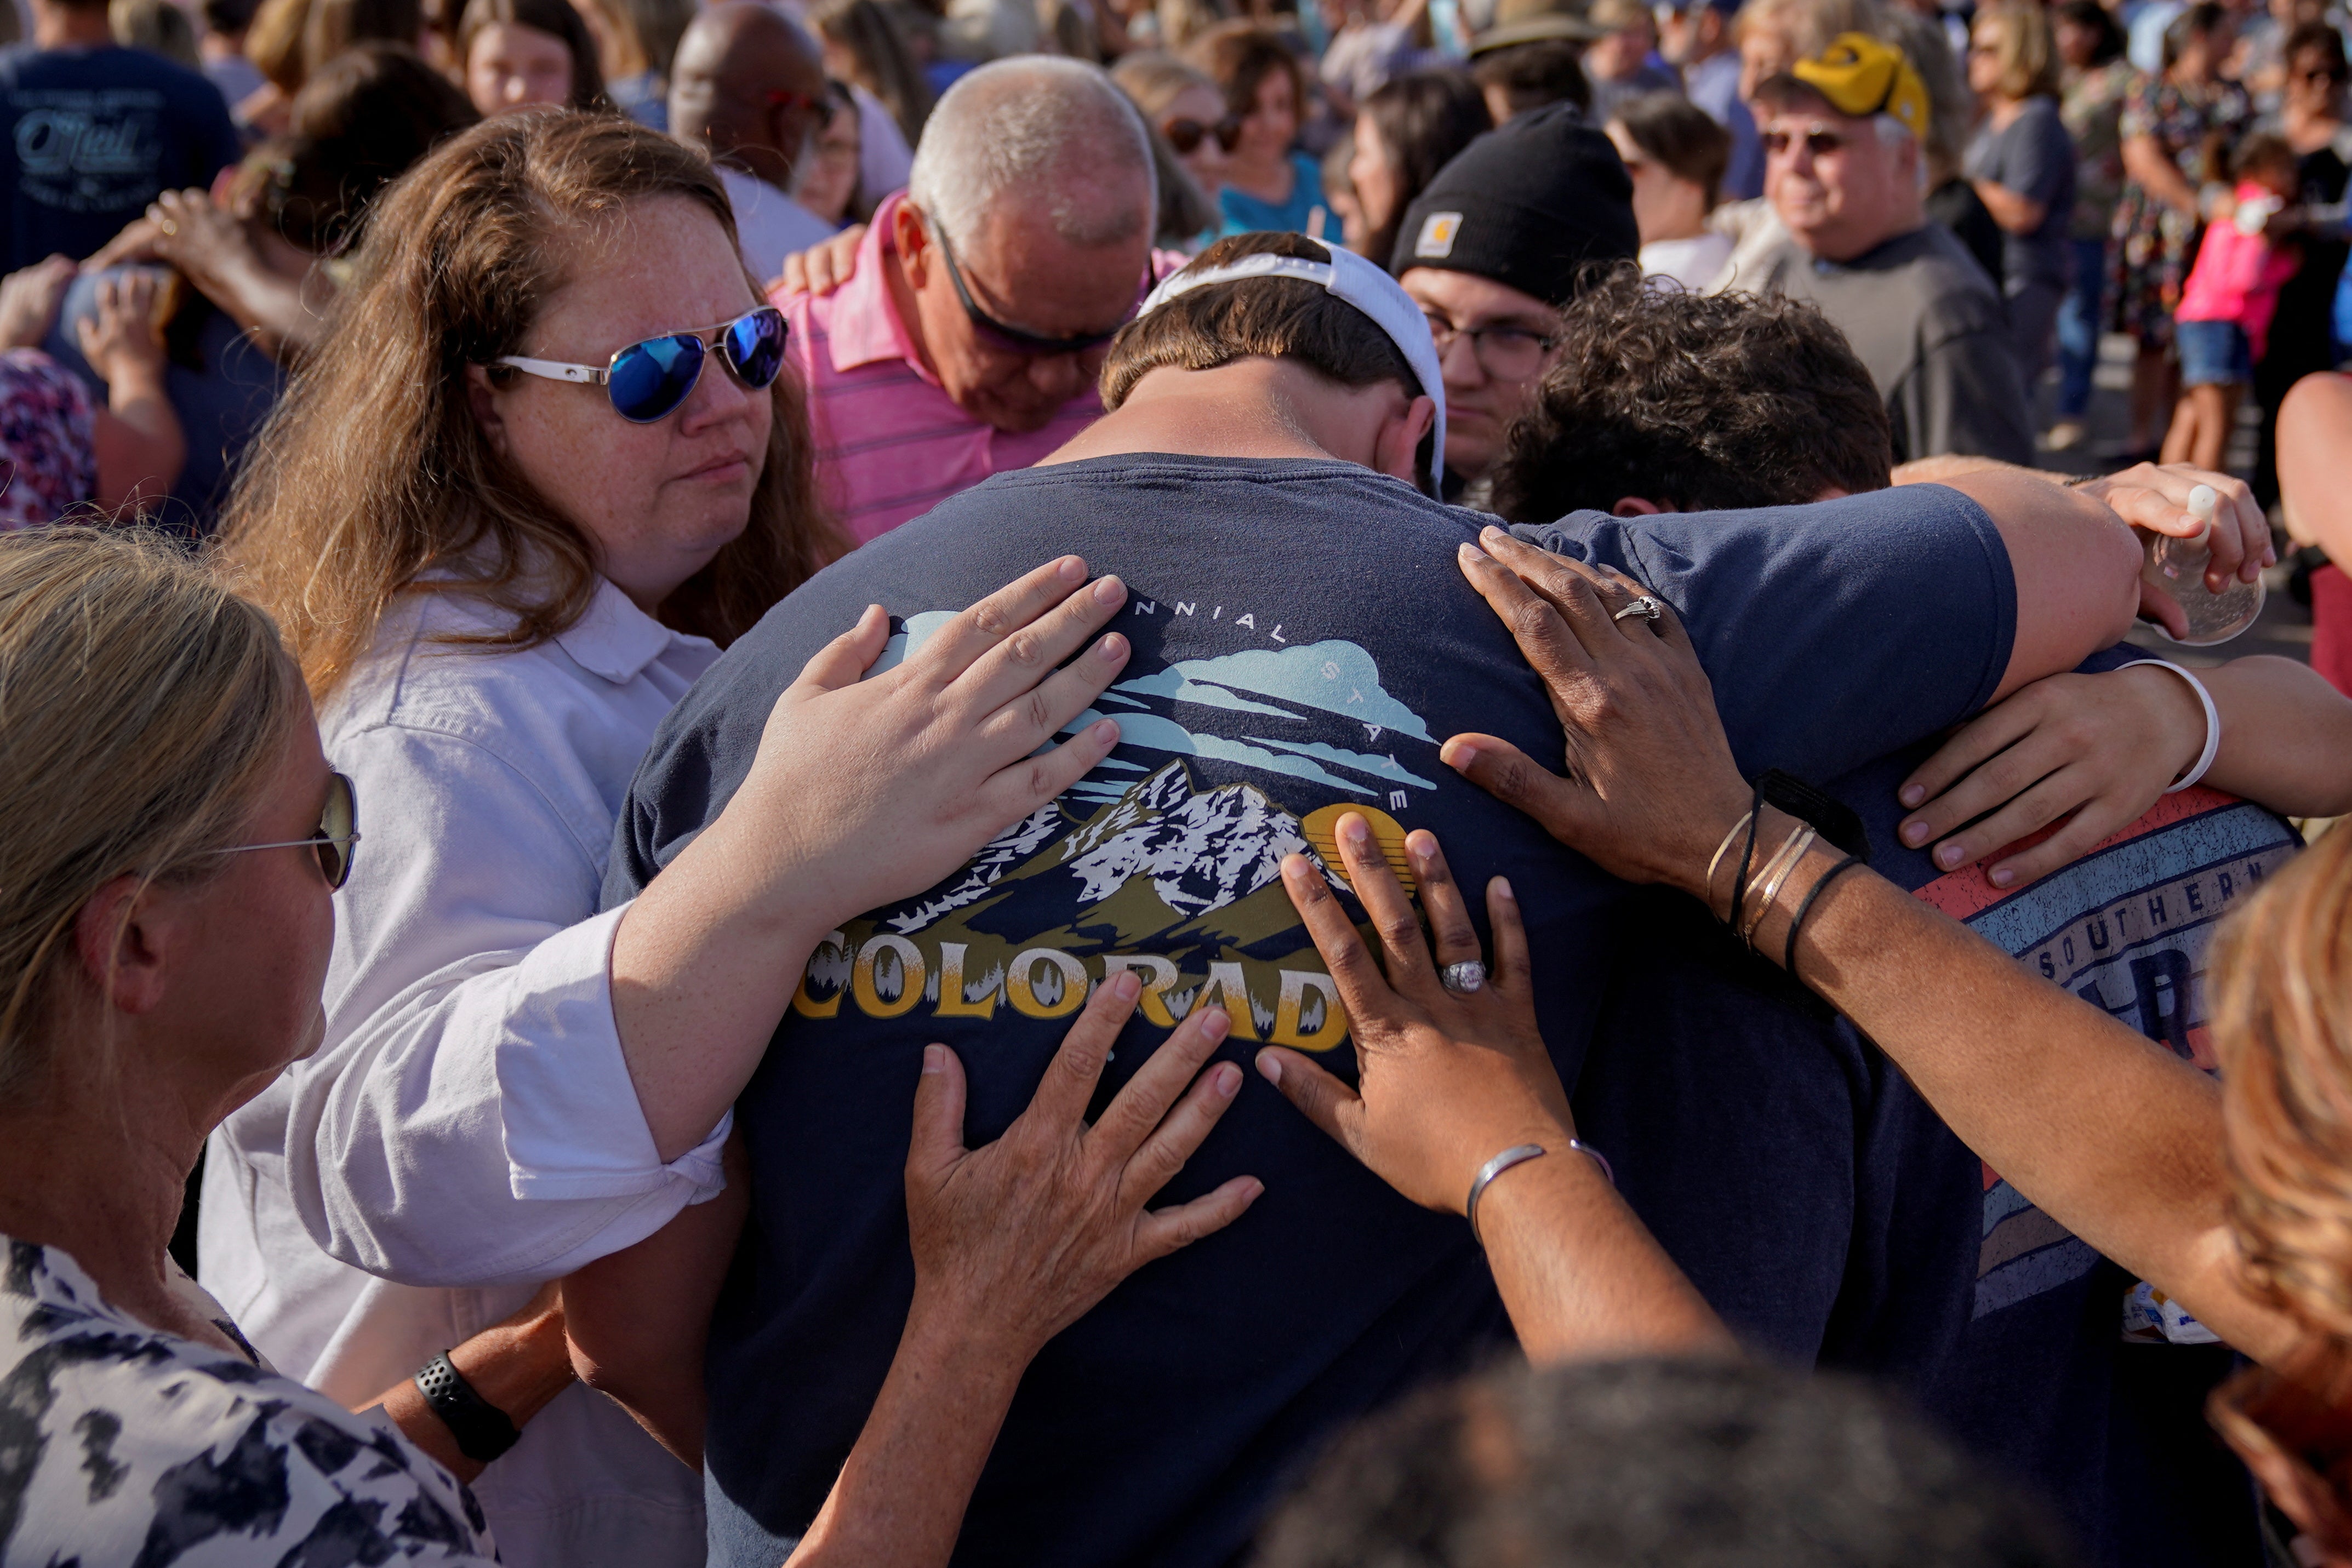 Community members embrace each other during the vigil on Sunday evening